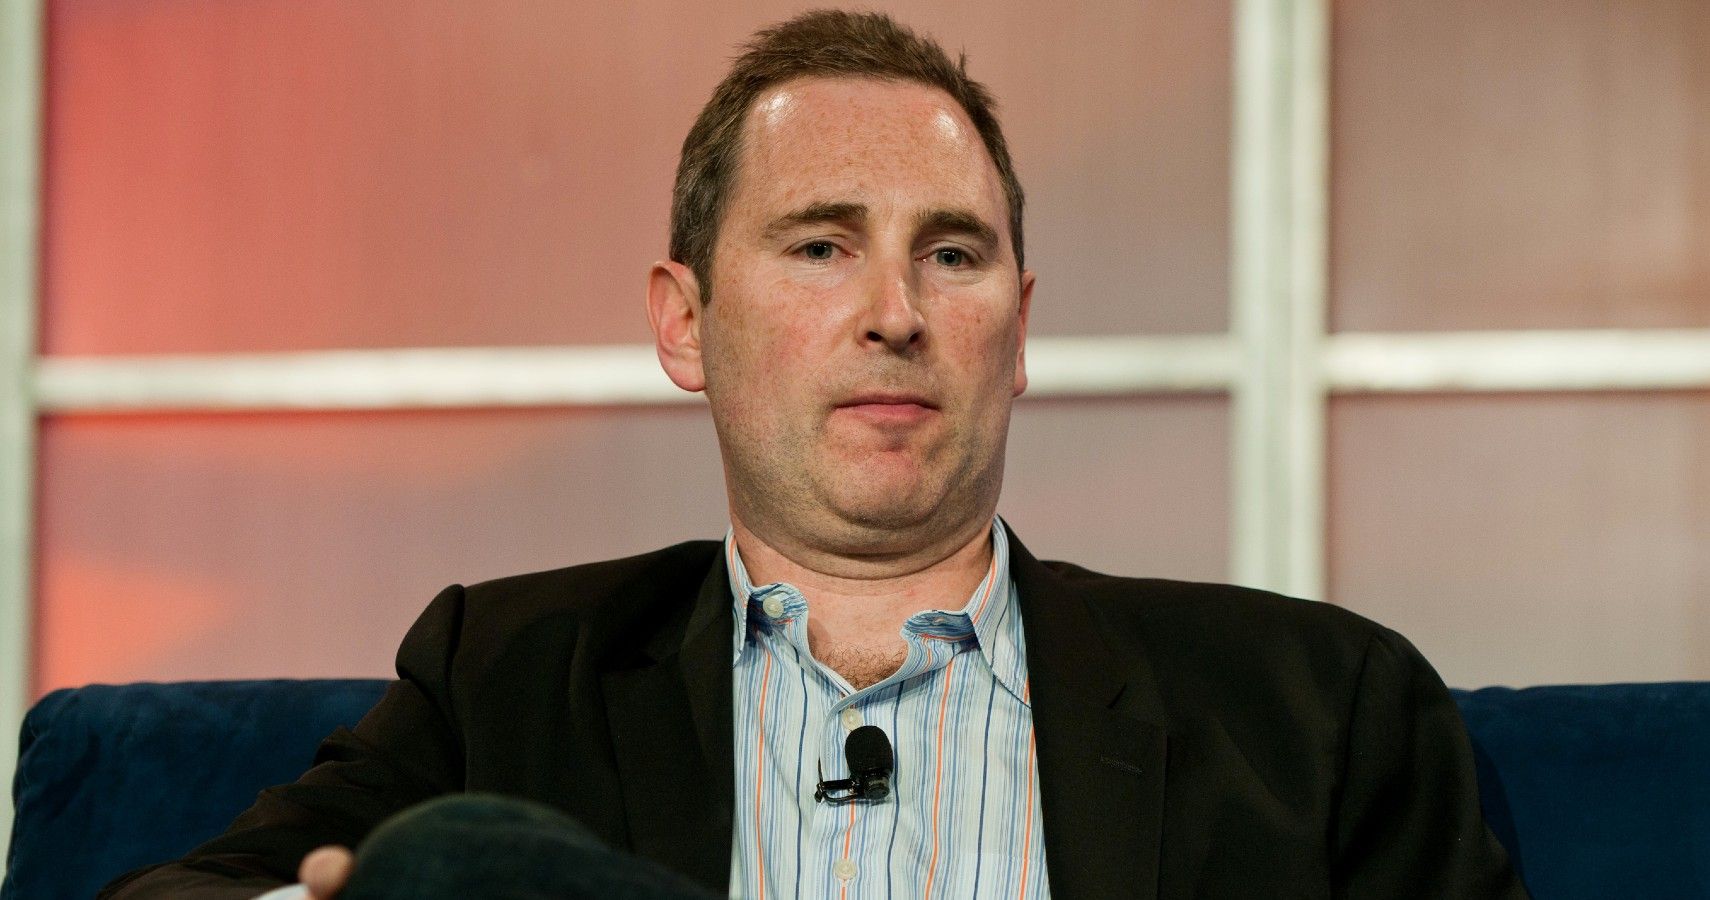 Amazon’s CEO Andy Jassy Earned $212 Million In 2021